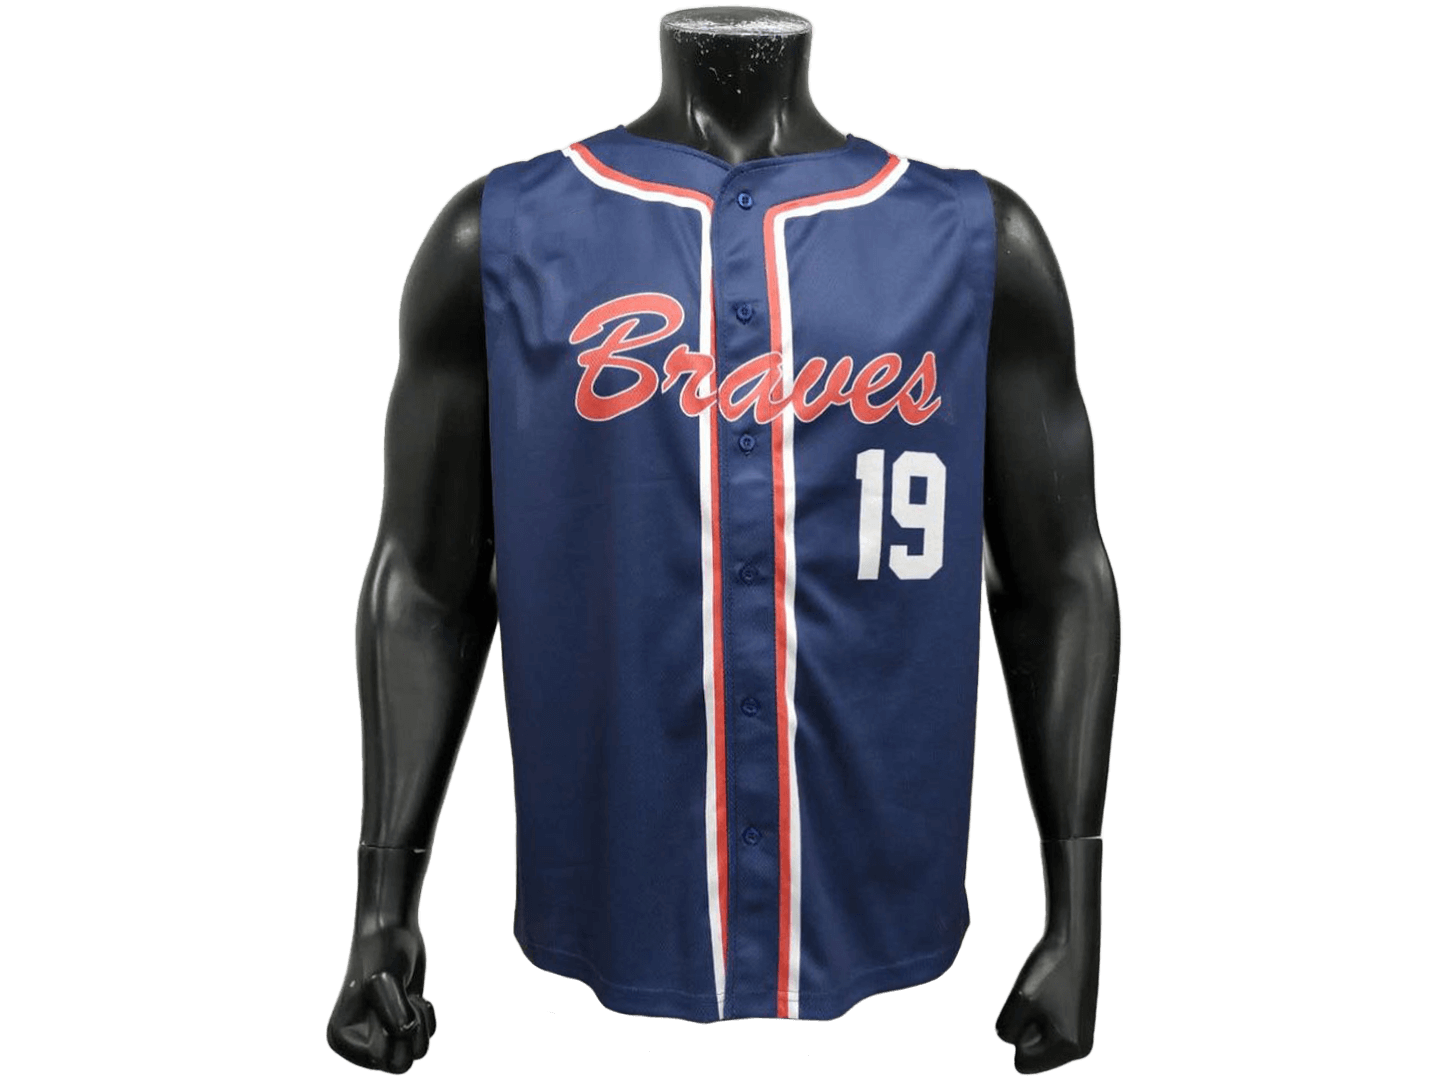 Design and deliver custom sublimation sports jersey or tanktop by